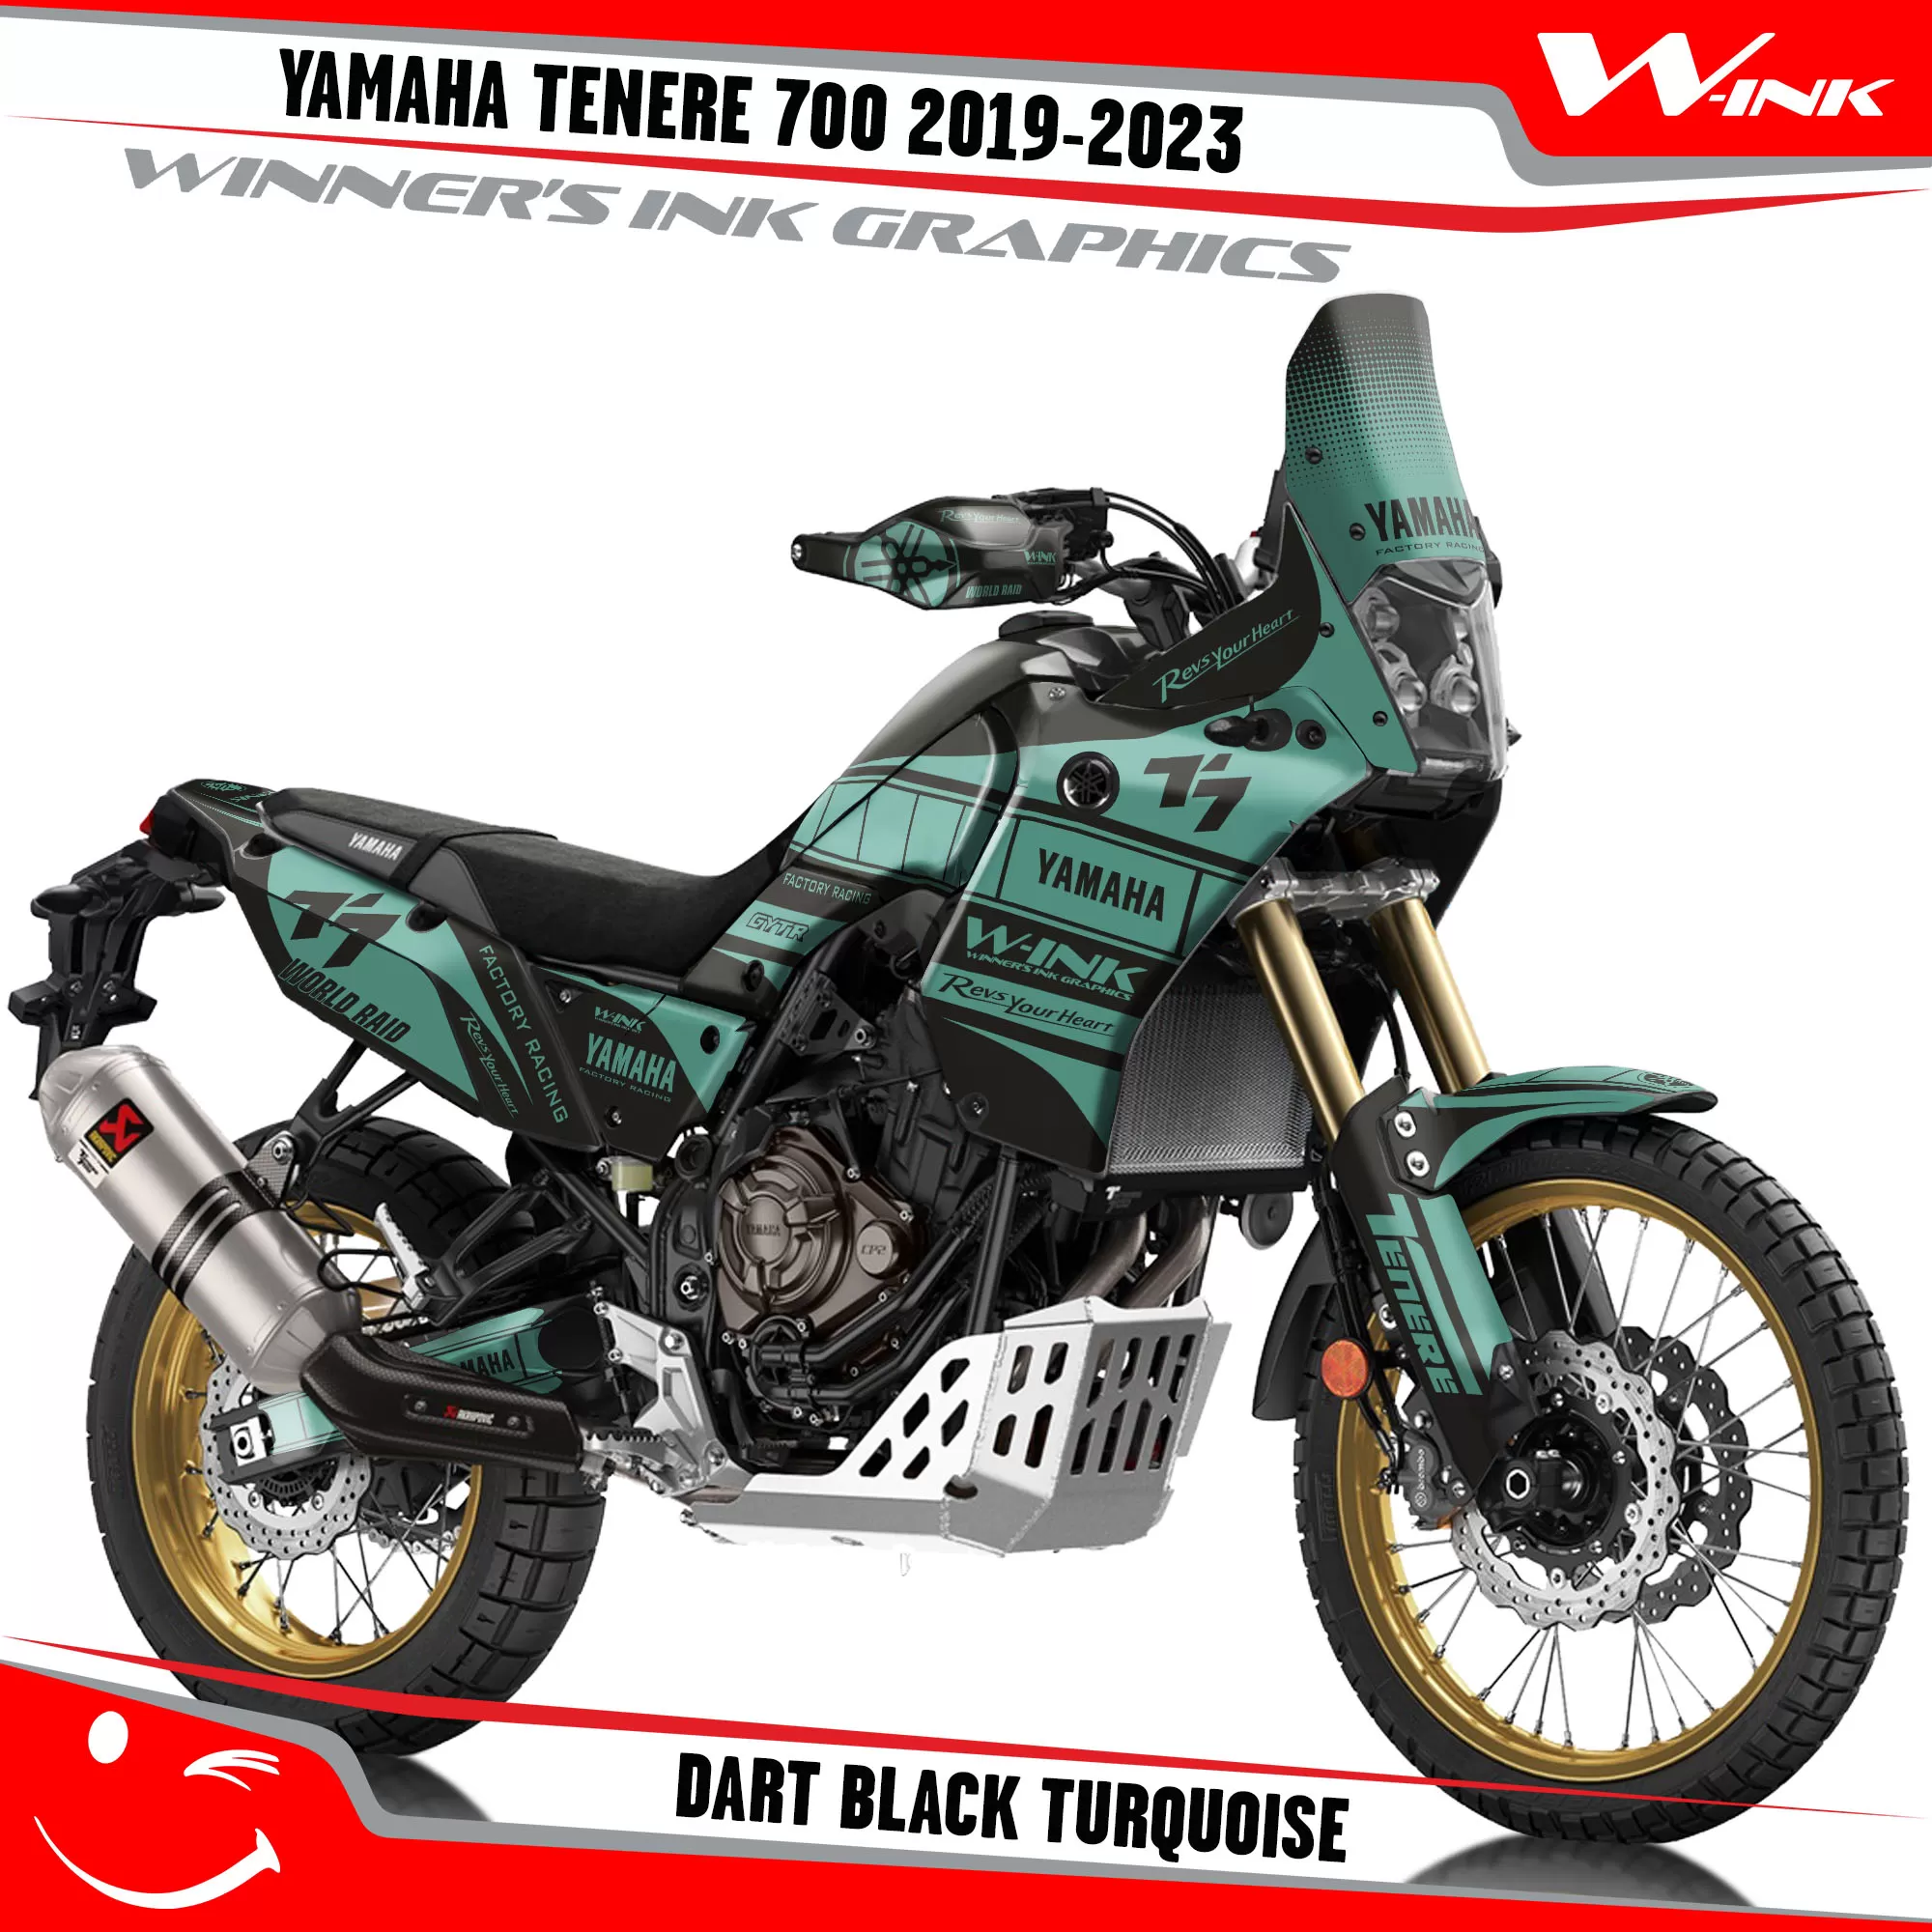 Yamaha-Tenere-700-2019-2020-2021-2022-2023-graphics-kit-and-decals-with-desing-Dart-Full-Black-Turquoise